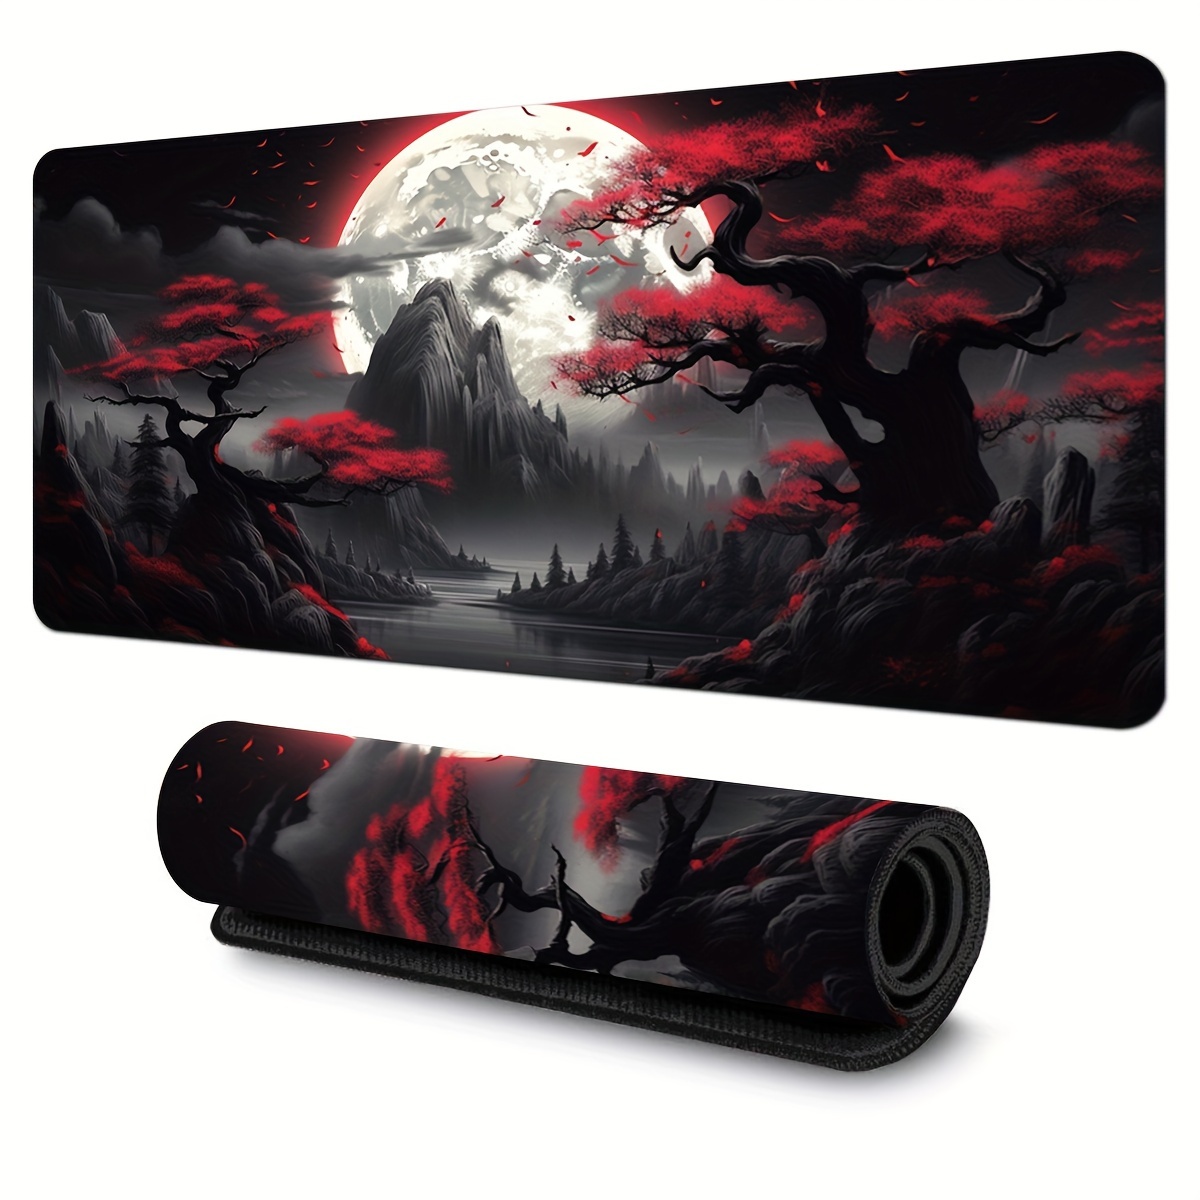 

Red Moon Desk Mat Desk Pad Large Gaming Mouse Pad E-sports Office Keyboard Pad Computer Mouse Non-slip Computer Mat Gift For Teen/boyfriend/girlfriend